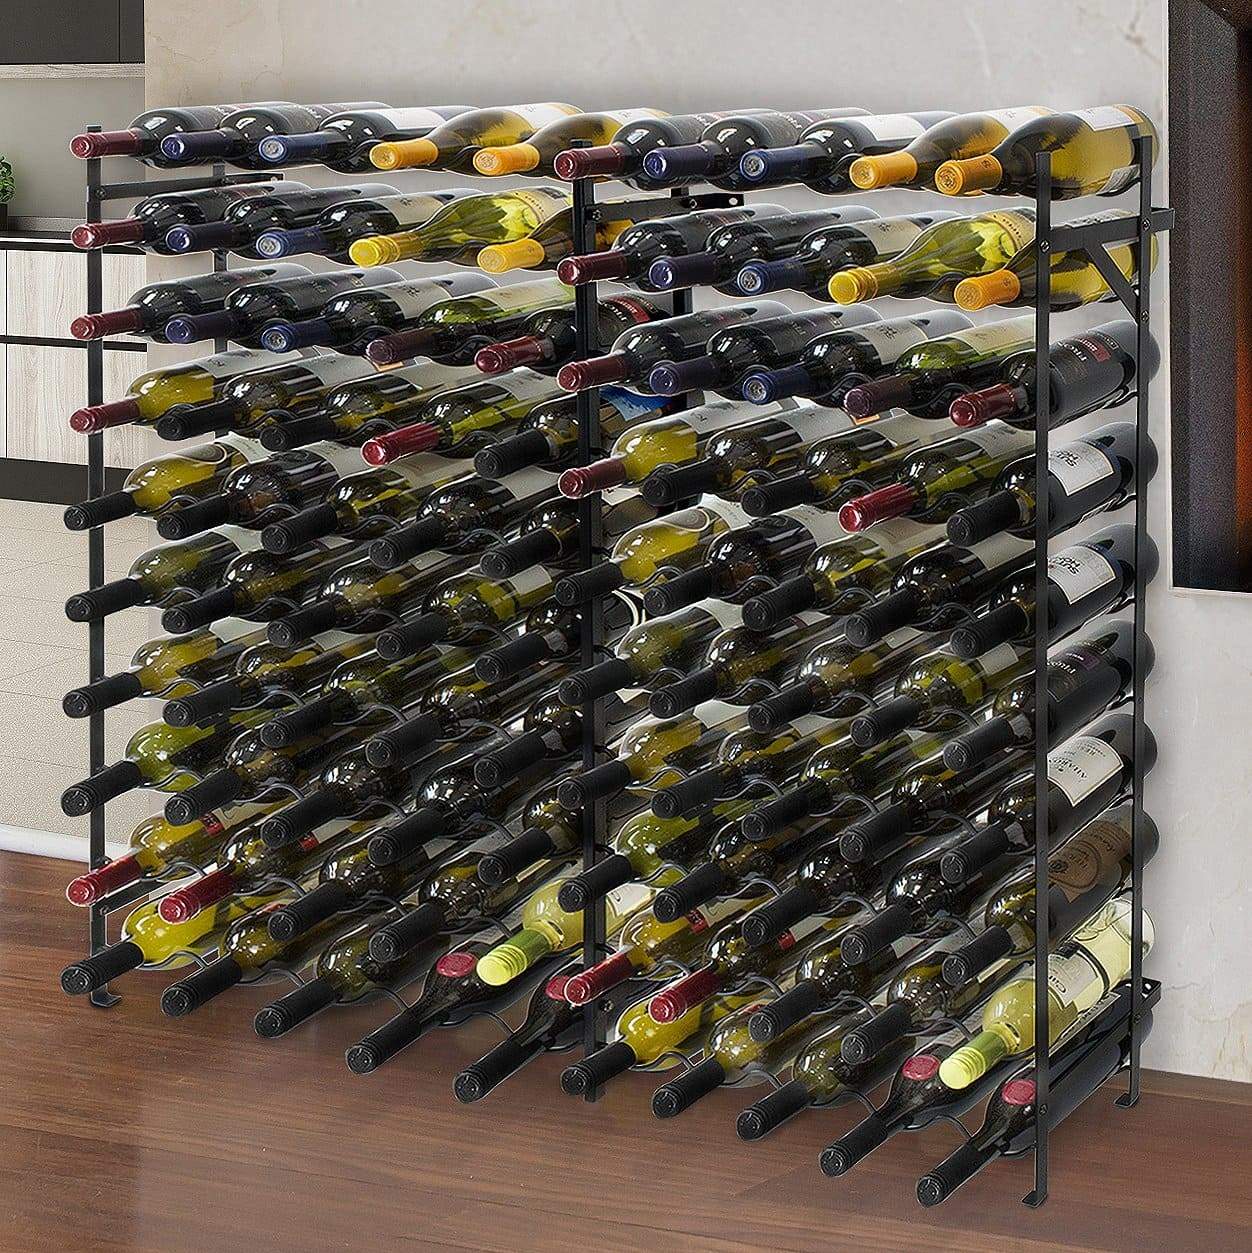 Discover the best sorbus display rack large capacity wobble free shelves storage stand for bar basement wine cellar kitchen dining room etc black height 40 100 bottle